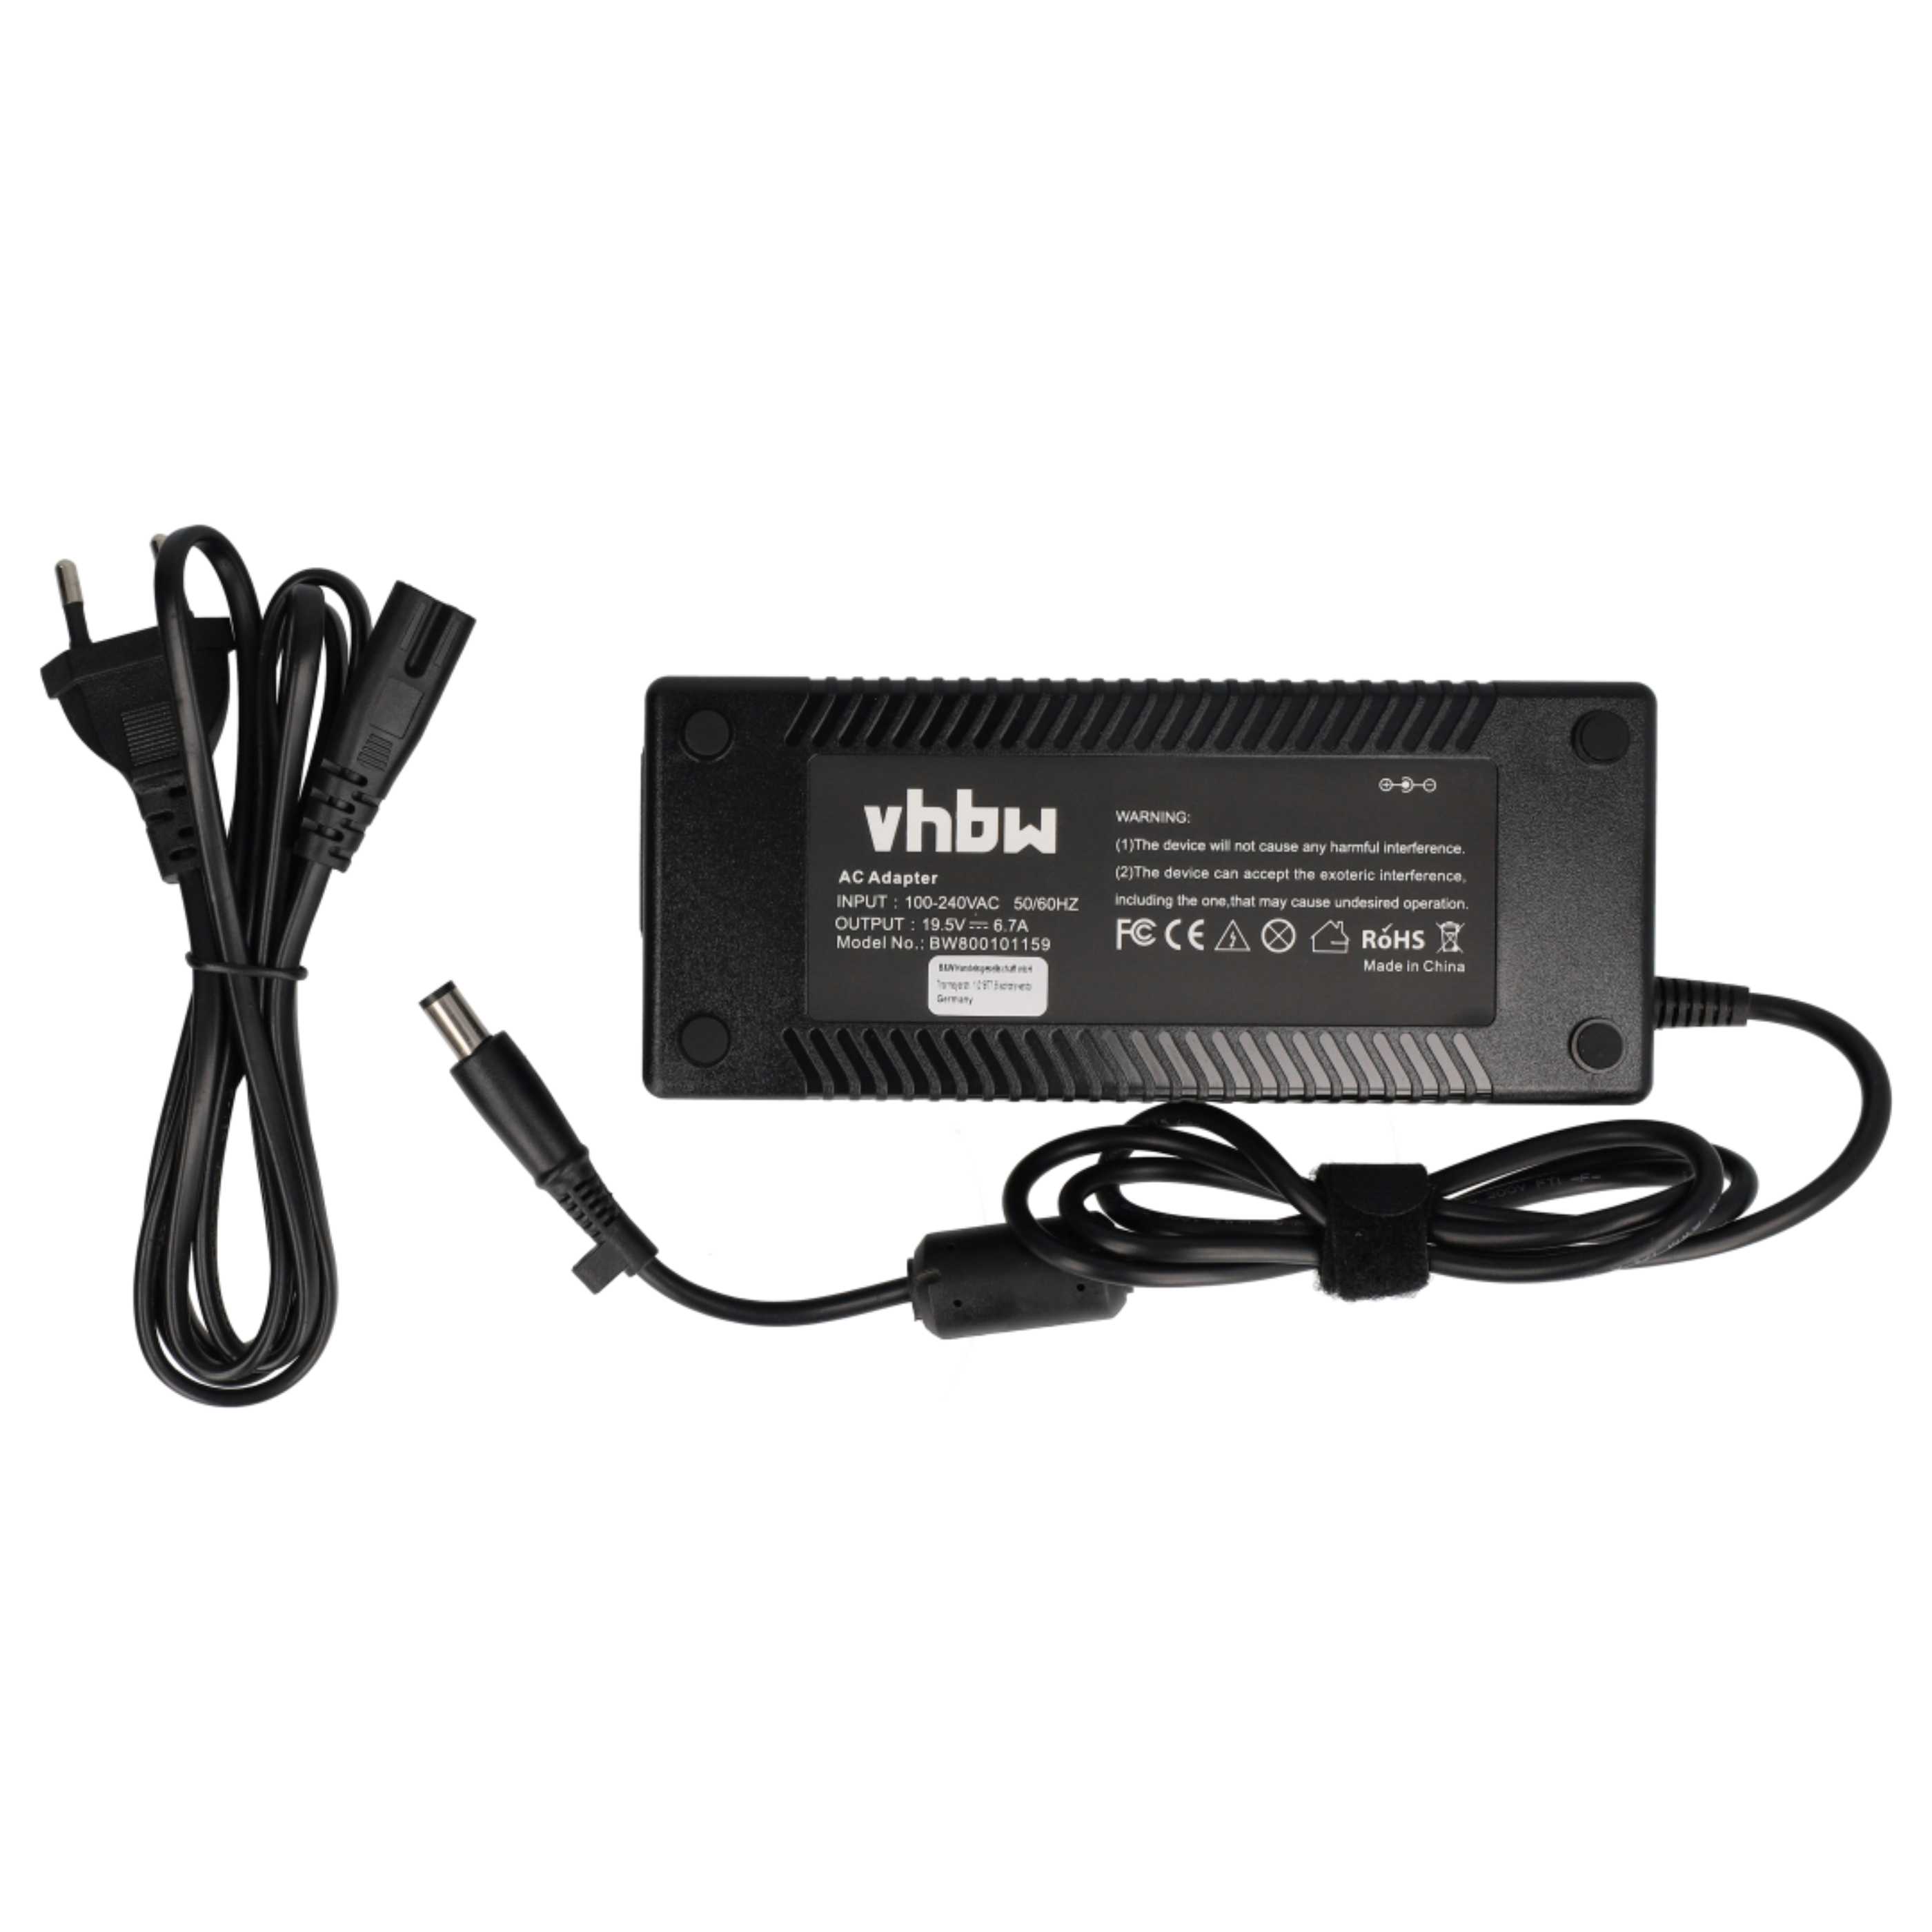 Mains Power Adapter replaces Dell PA-13, PA-1131-02D for DellNotebook, 131 W